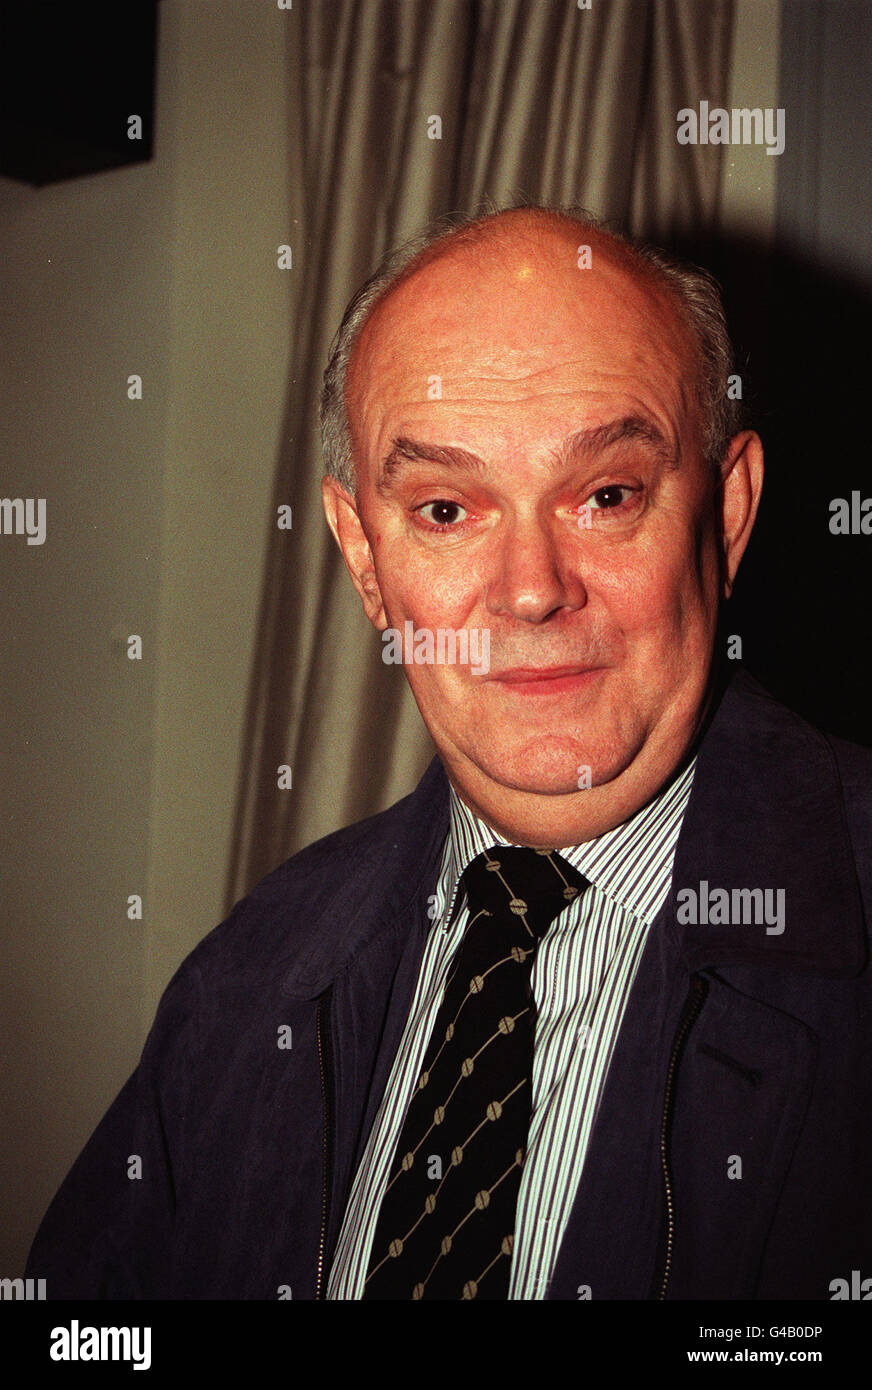 APRIL 12th: on this day in 1939, the playwright Alan Ayckbourn was born. PA NEWS PHOTO 29/1/98 PLAYWRIGHT SIR ALAN AYCKBOURN AFTER RECEIVING THE 25, 000 LLOYDS PLAYWRIGHT OF THE YEAR AWARD FOR HIS PLAY 'THINGS WE DO FOR LOVE' IN LONDON Stock Photo